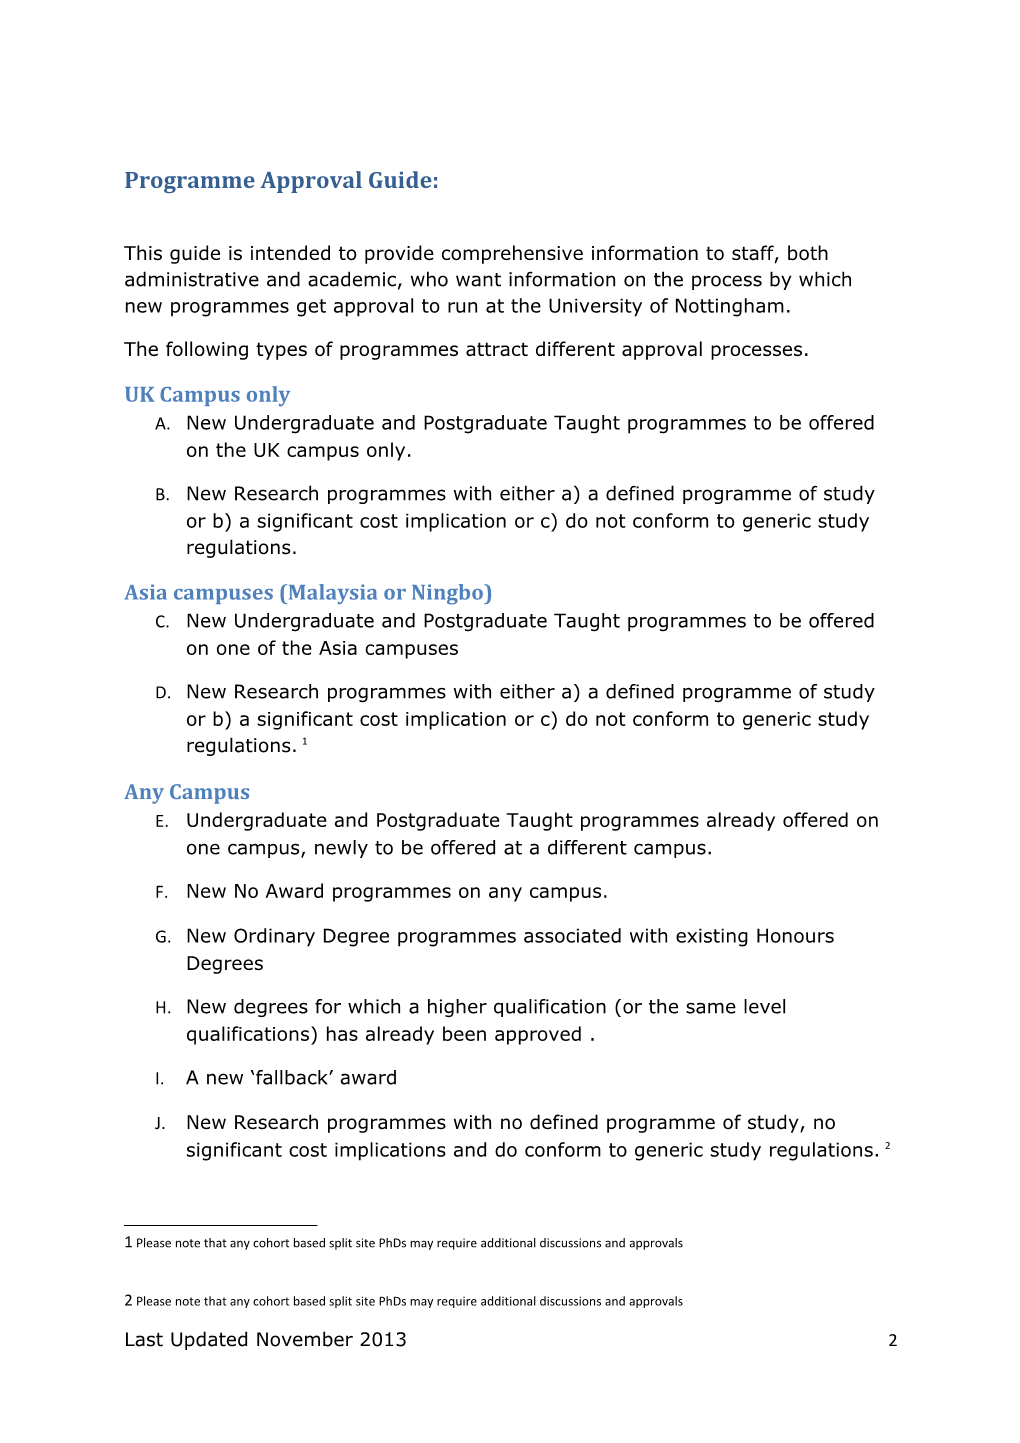 Programme Approval Guide